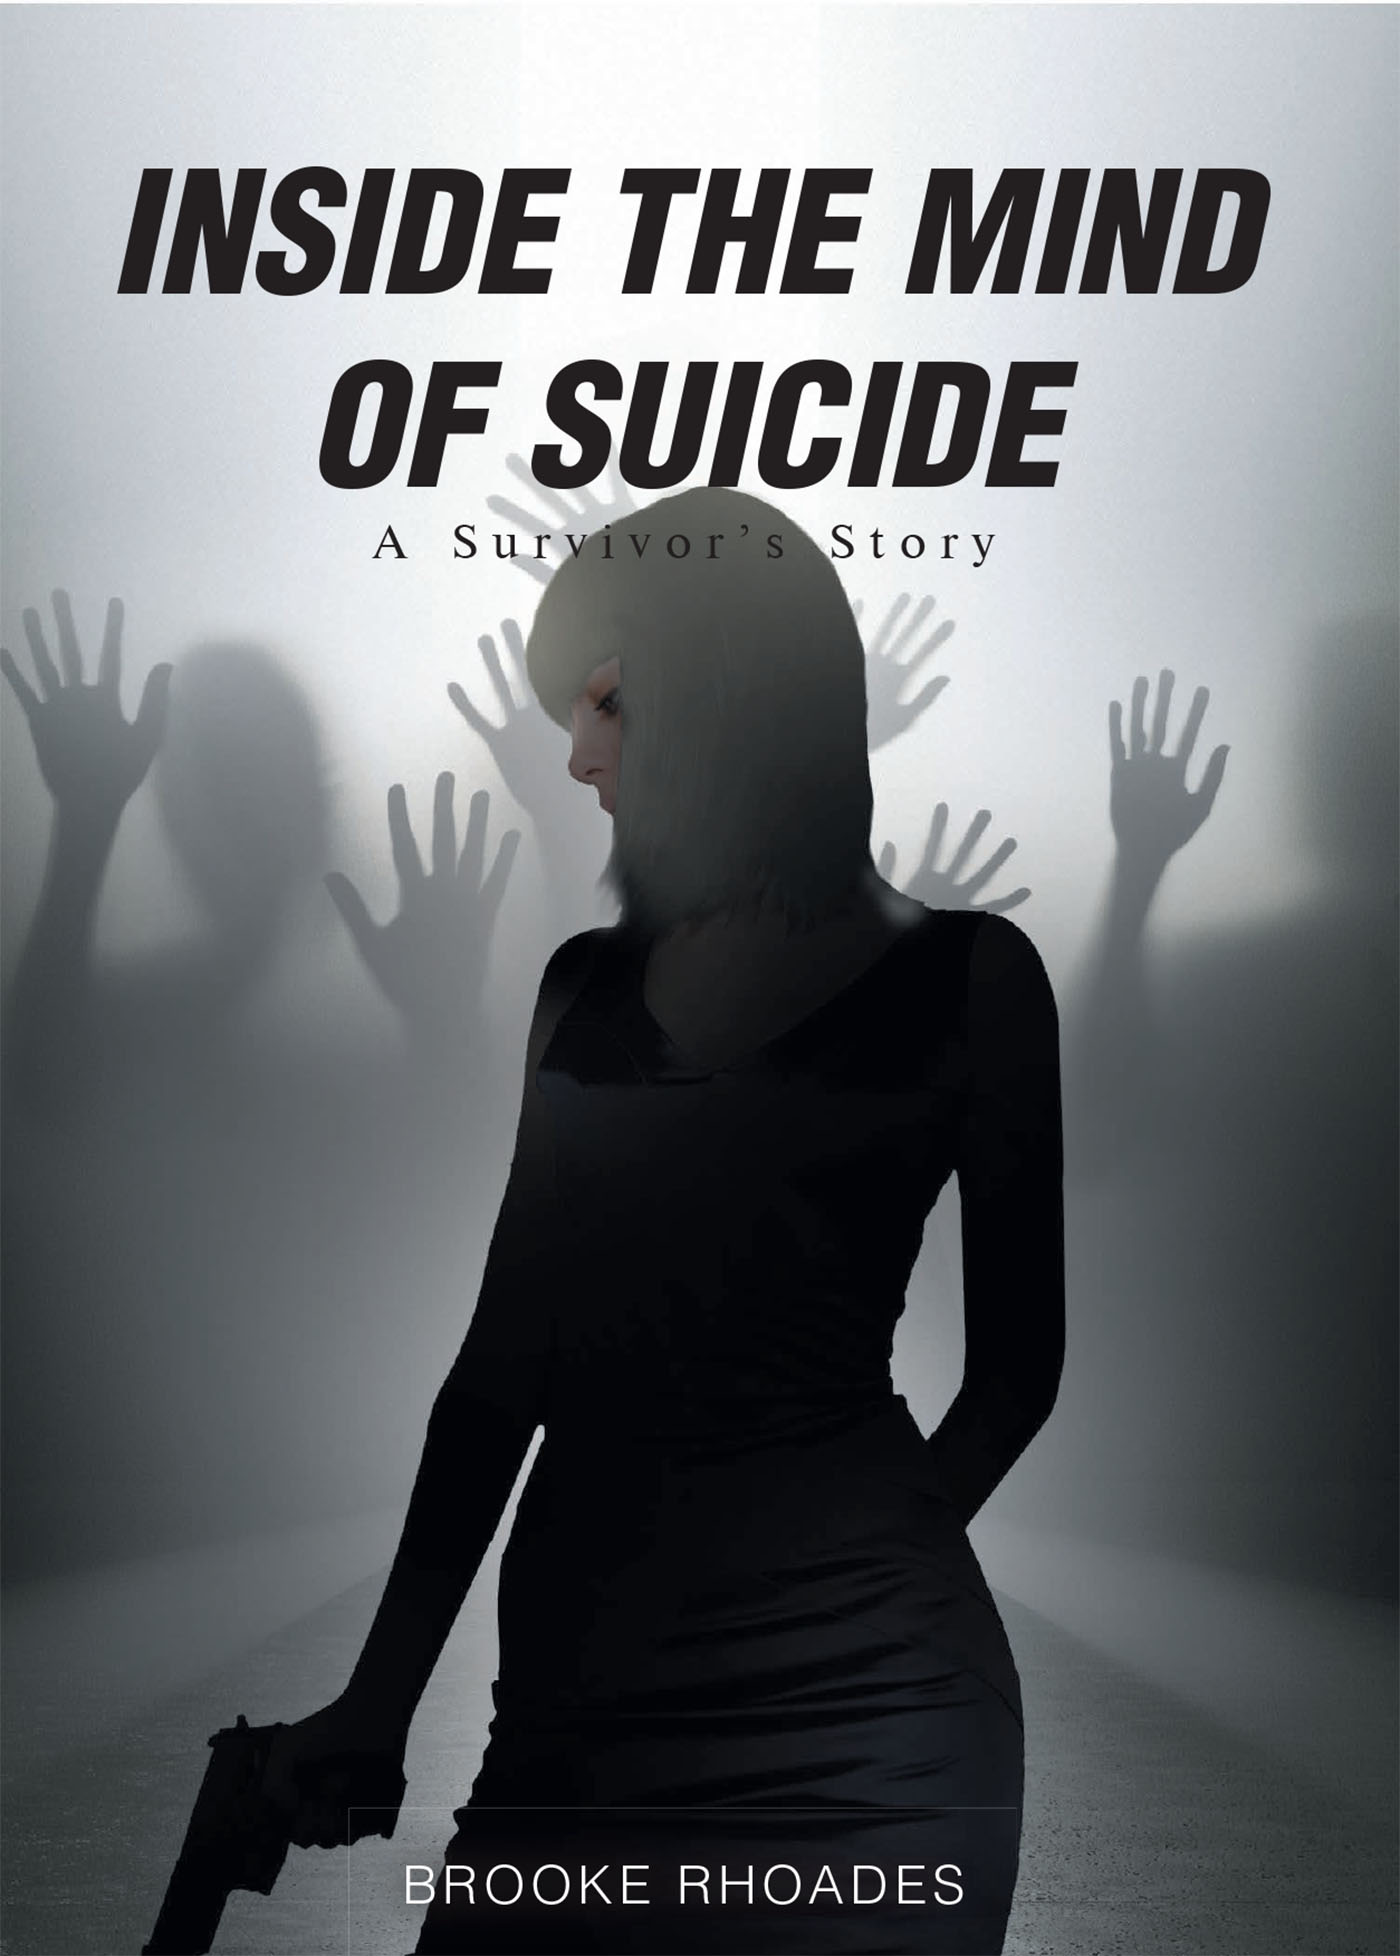 Brooke Rhoades’s Newly Released "Inside the Mind of Suicide: A Survivor’s Story" is a Powerful Story of One Woman’s Healing Journey